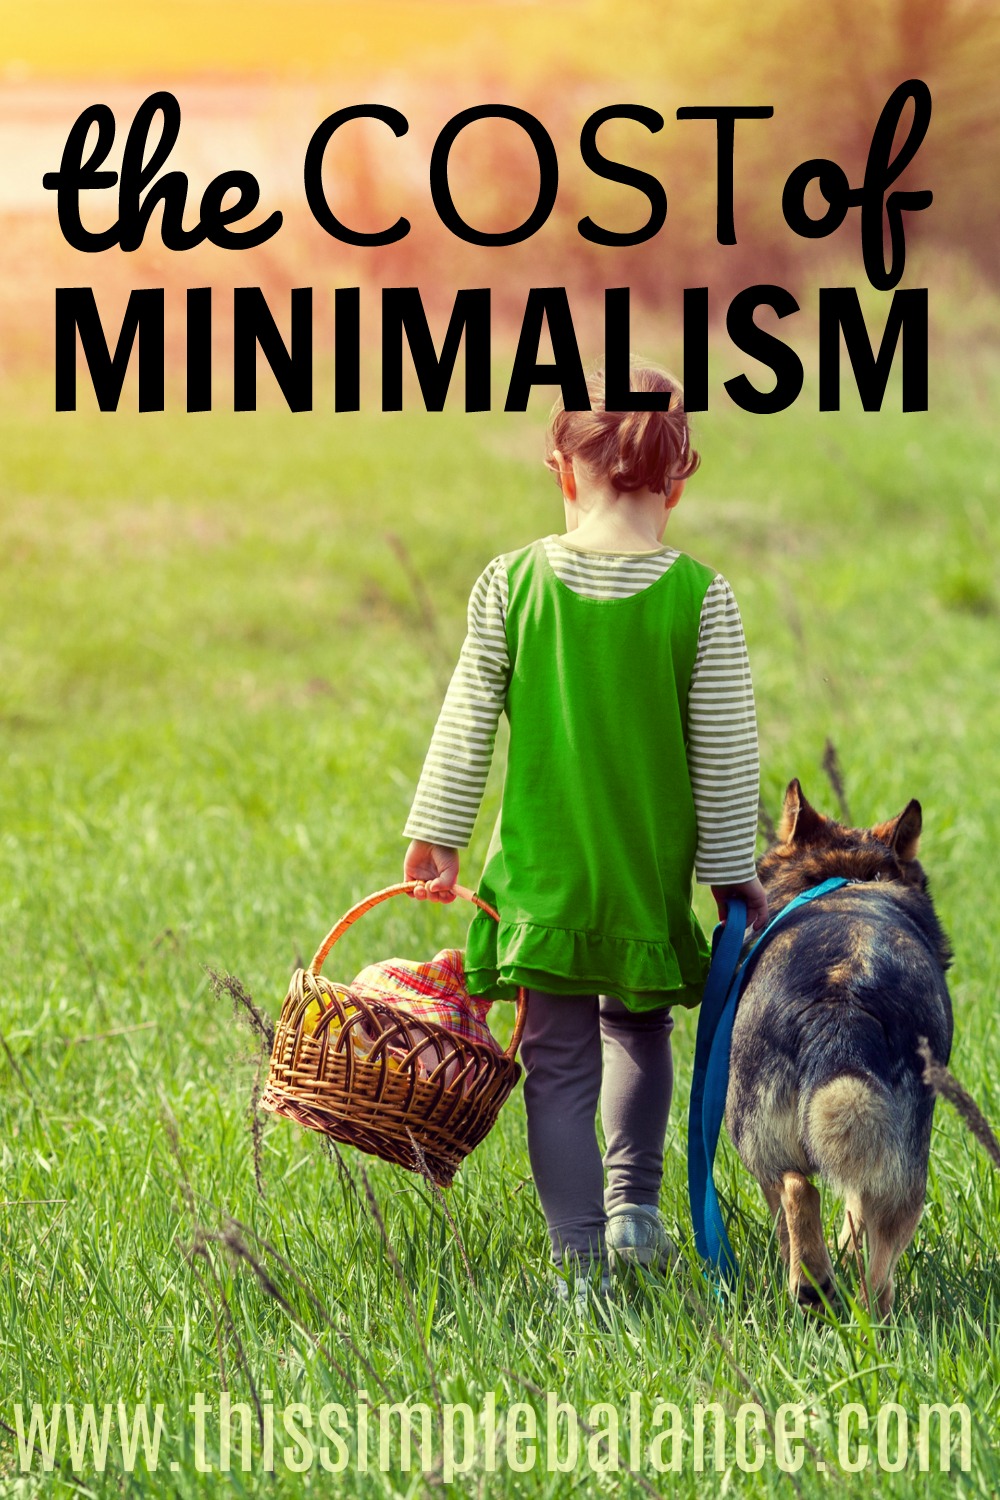 young girl in green dress walking through a field with a dog, carrying a basket, with text overlay "the cost of minimalism"